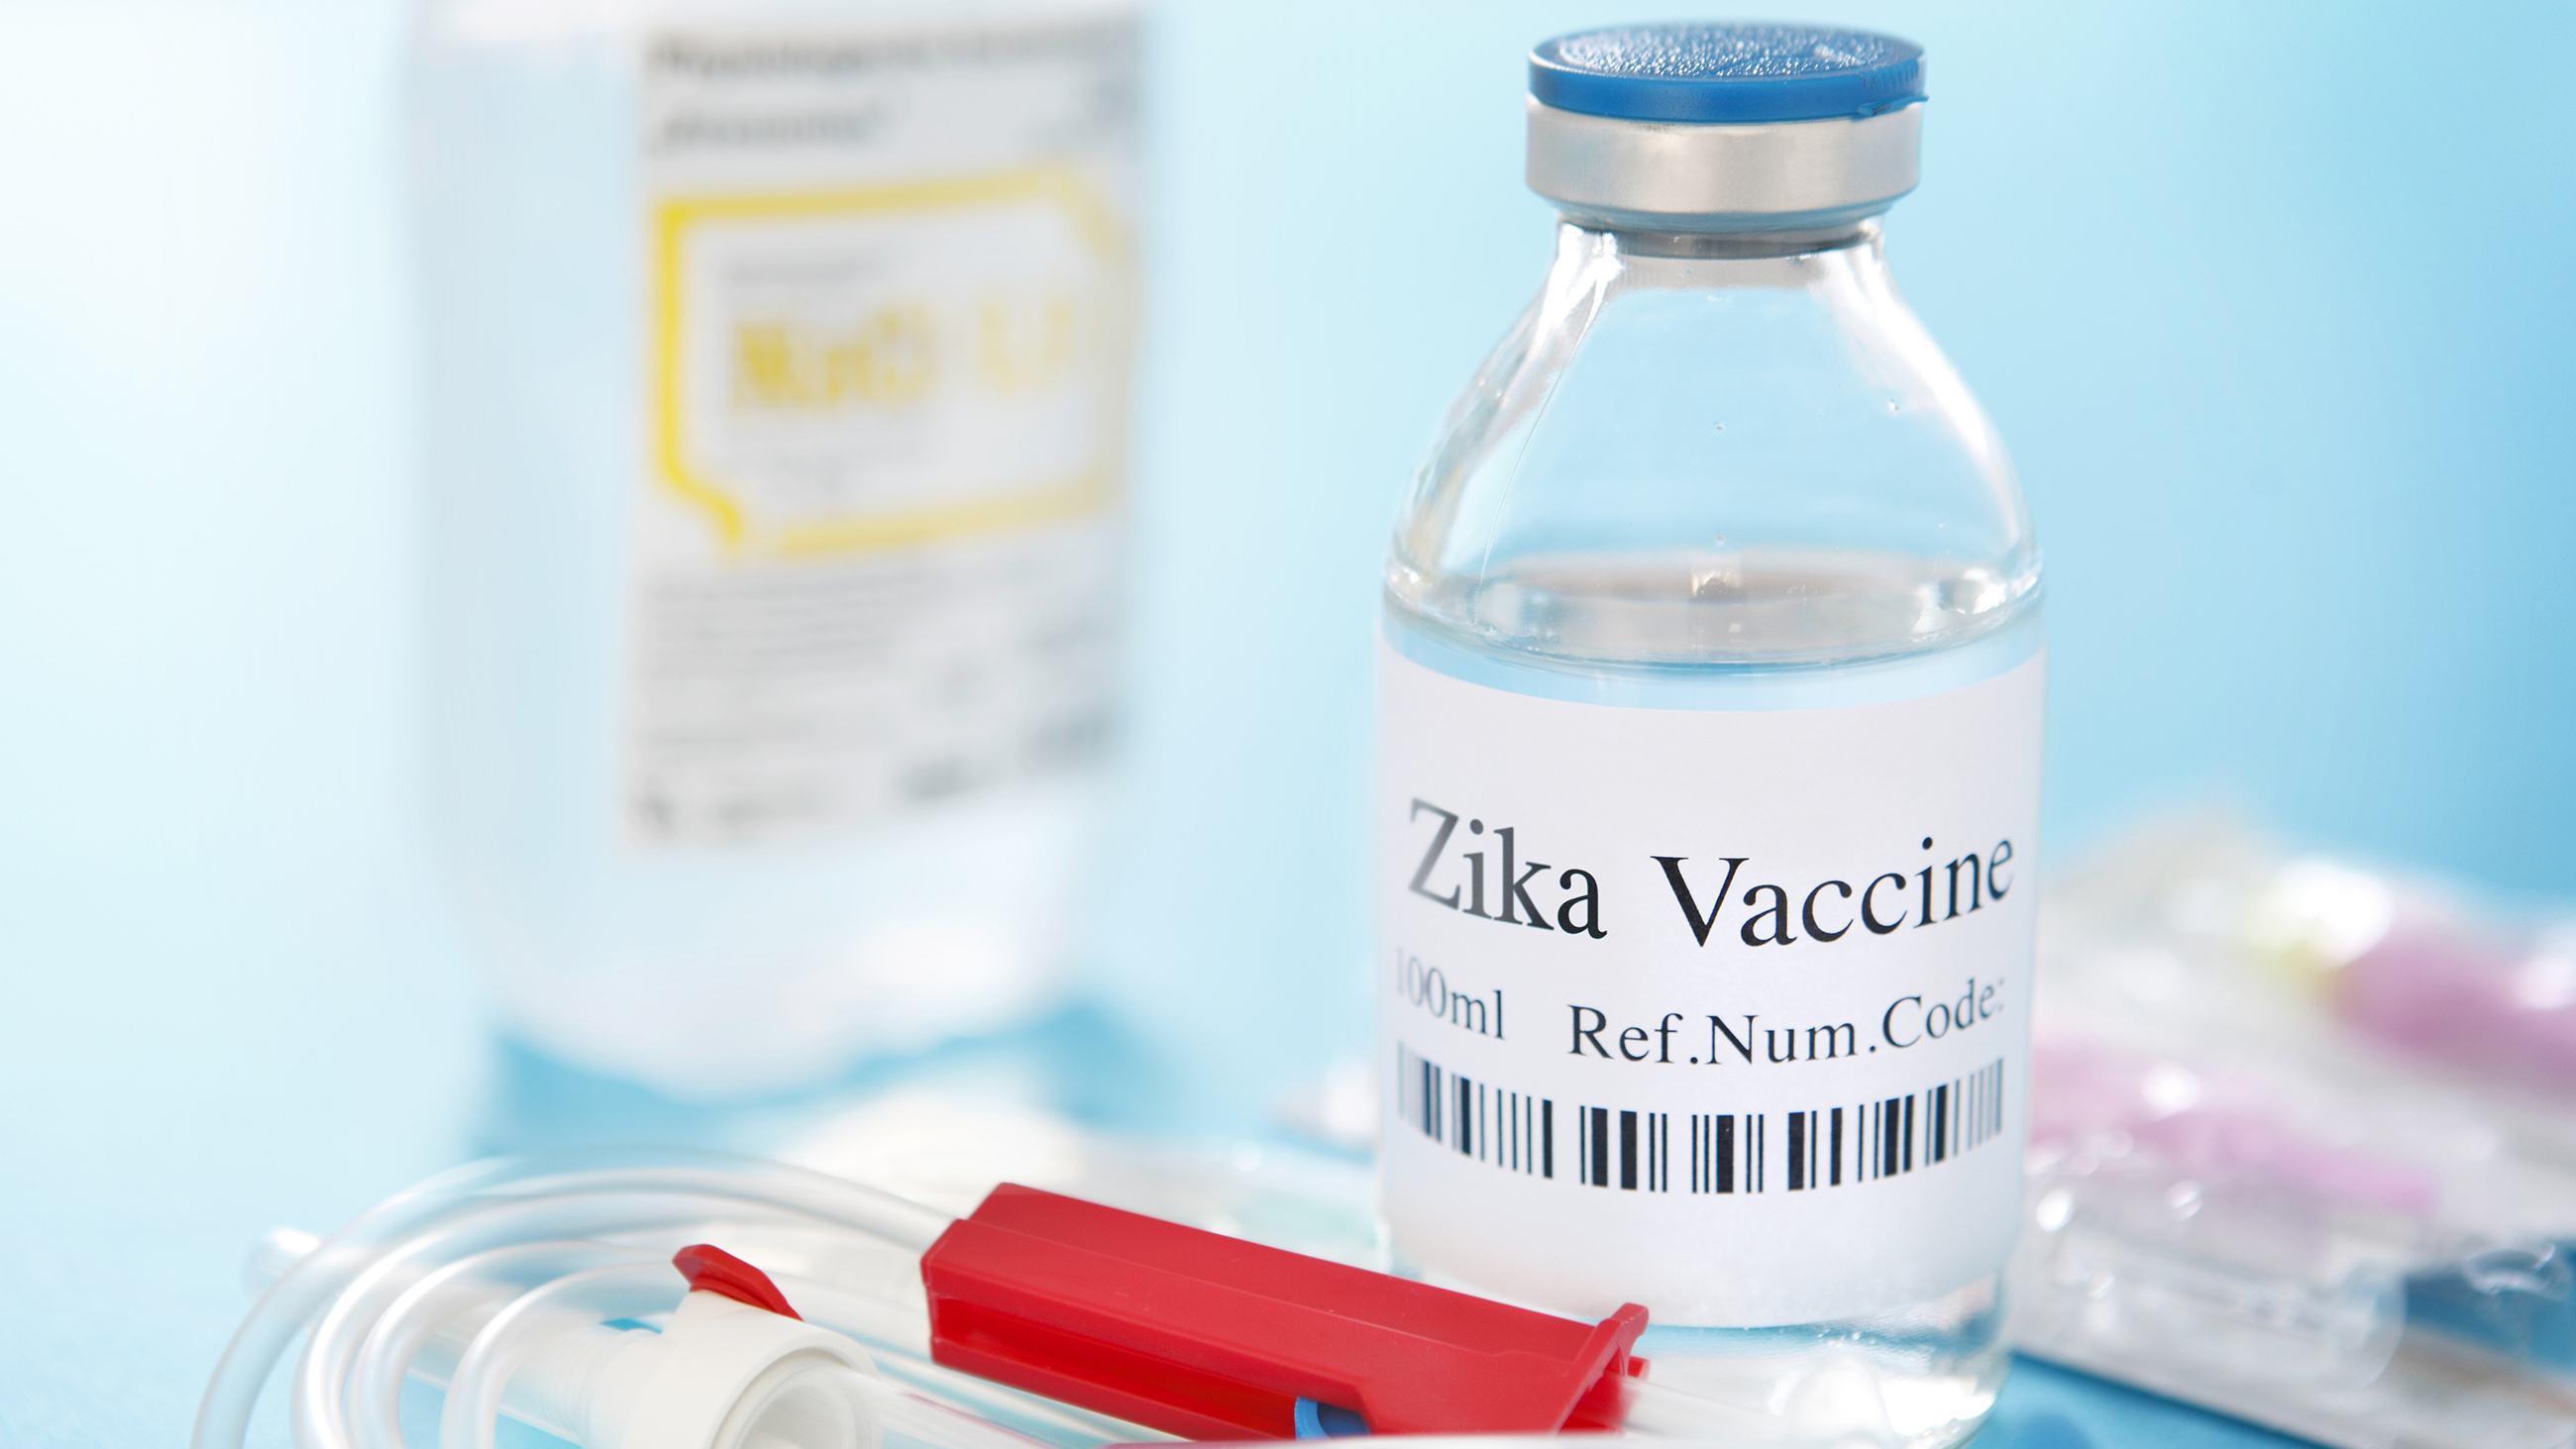 More than a dozen companies and government organizations race to develop a Zika vaccine from scratch, with hopes of offering a solution to the disease within the next two years.